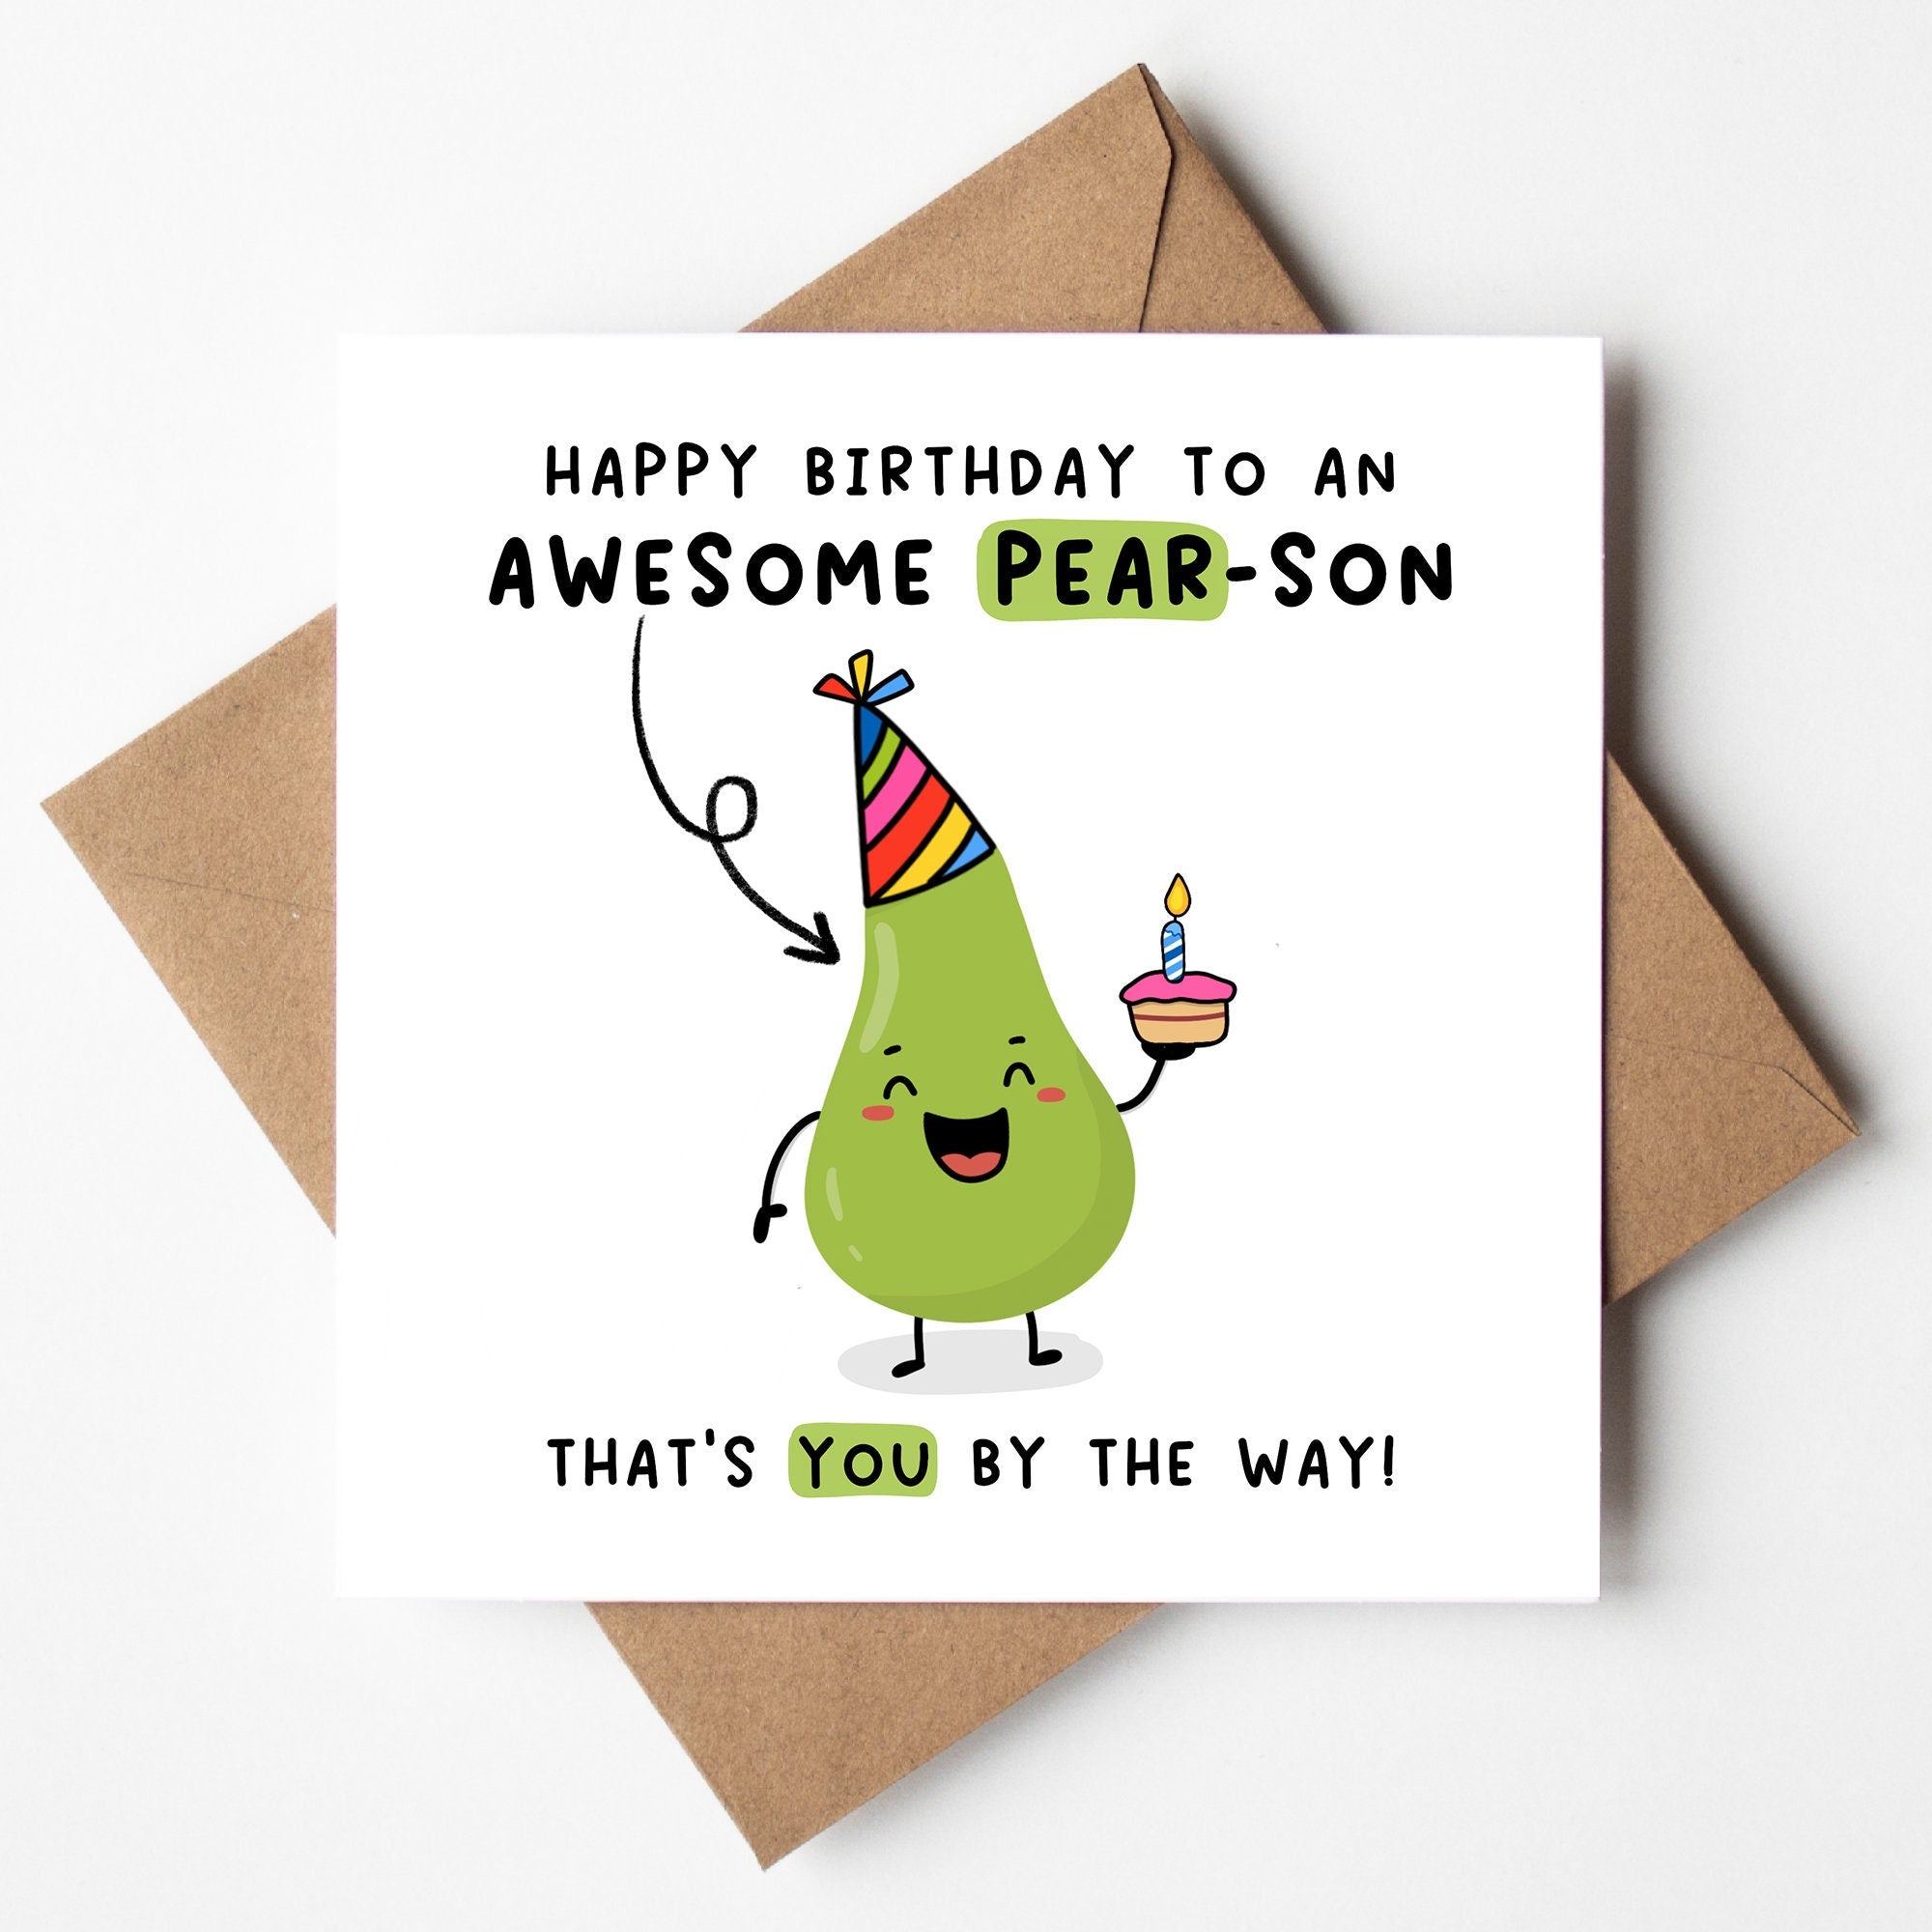 Happy birthday to an awesome Pear-son, for boyfriend, girlfriend, work bestie, sister, cousin